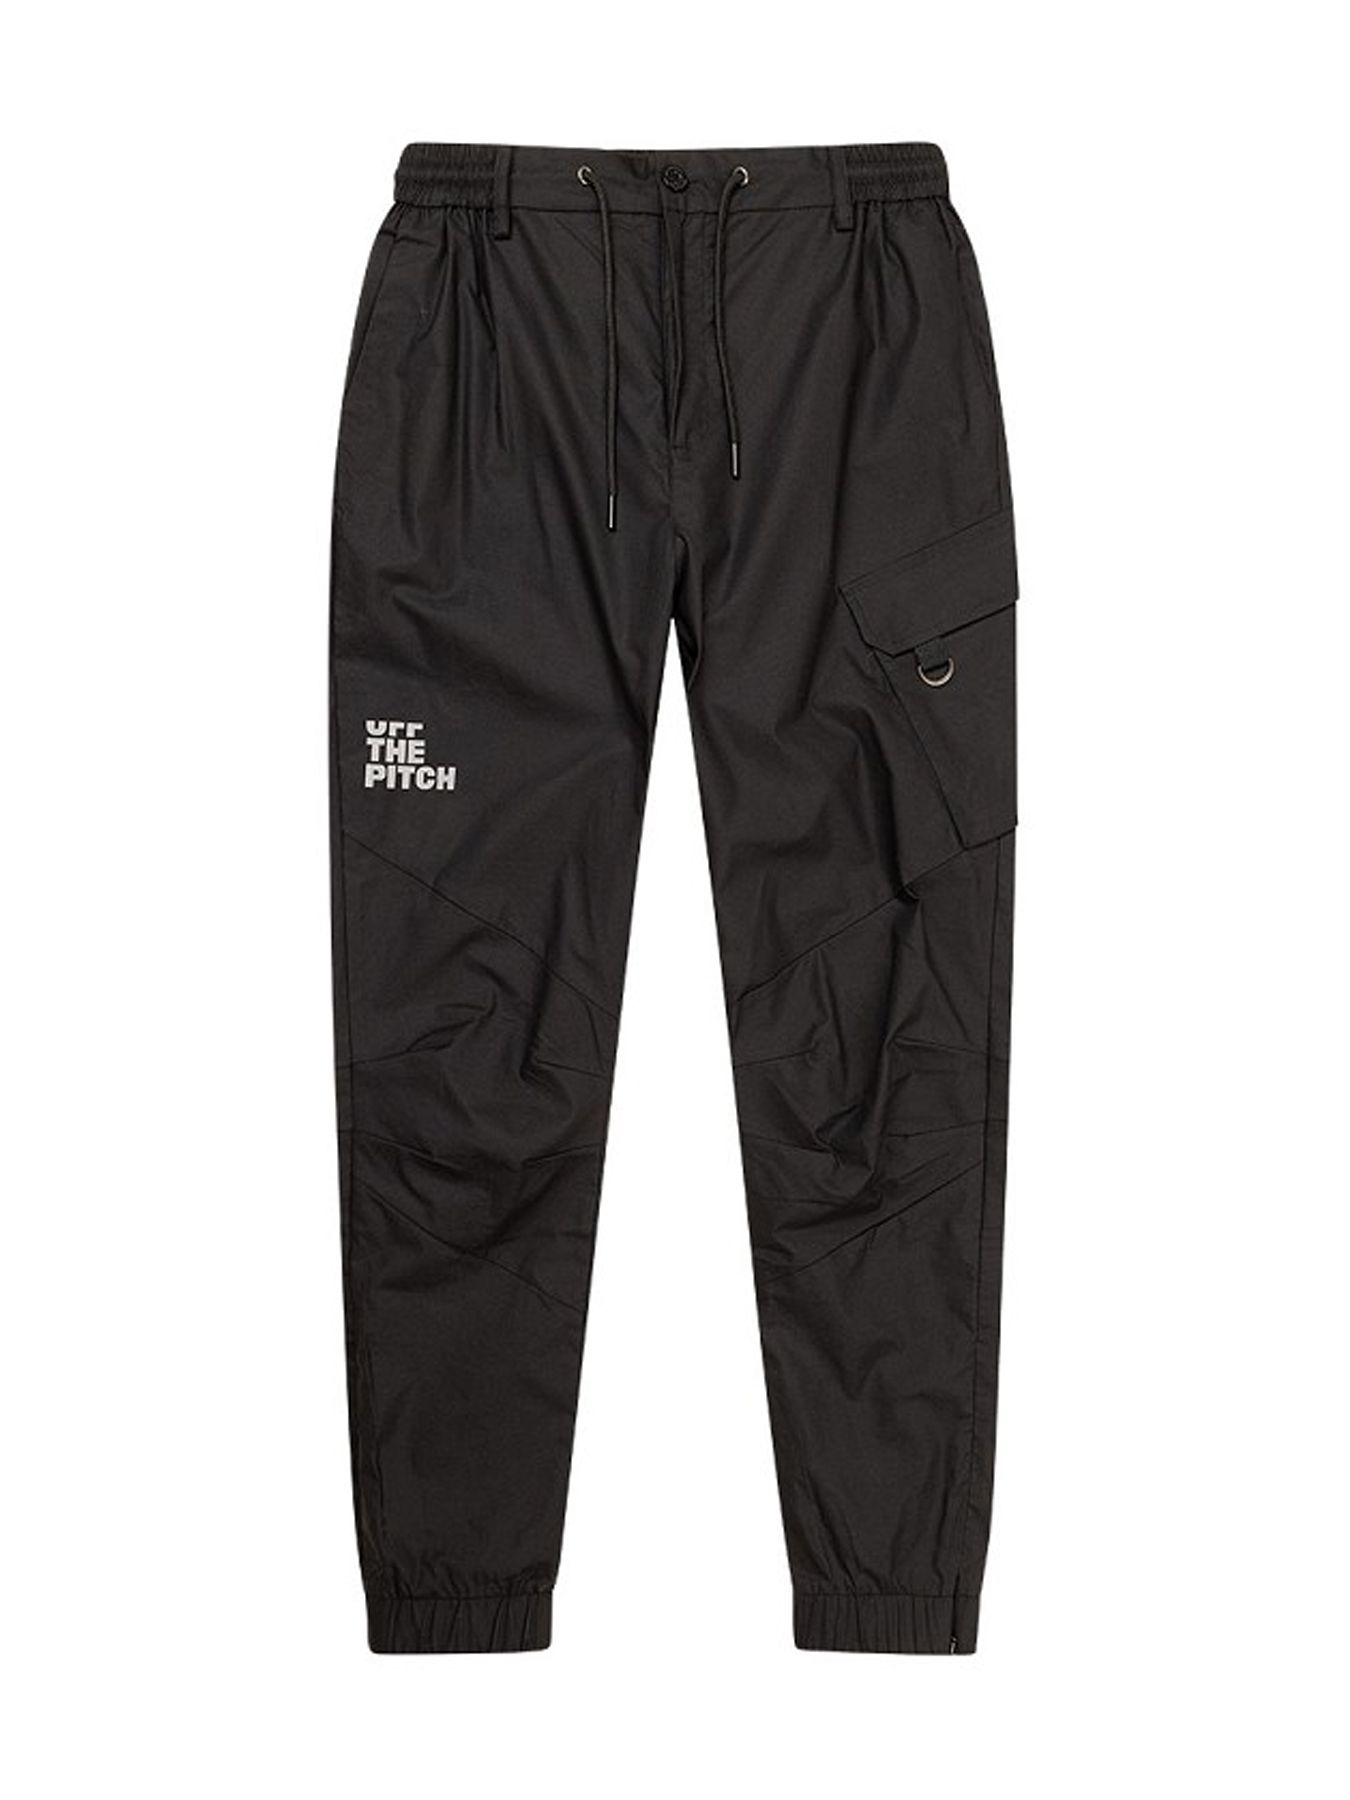 Off The Pitch Tammy woven pants Black 00106076-BLC